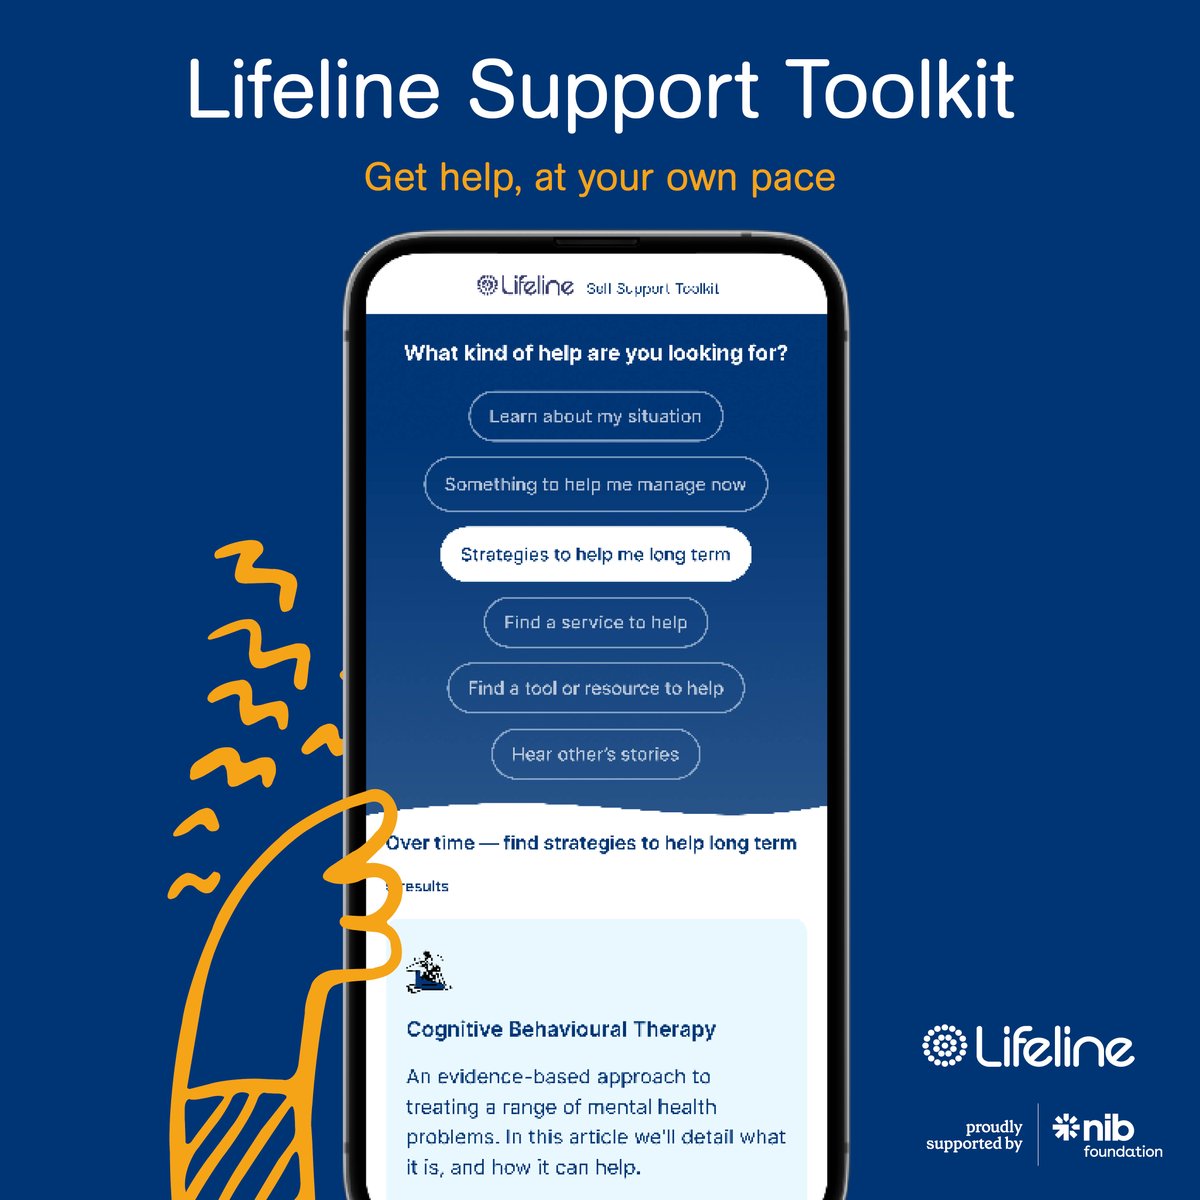 By educating ourselves about the risk factors associated with suicide, we are better equipped to offer support to our friends, family, and of course ourselves. Try Lifeline's Support Toolkit here: toolkit.lifeline.org.au